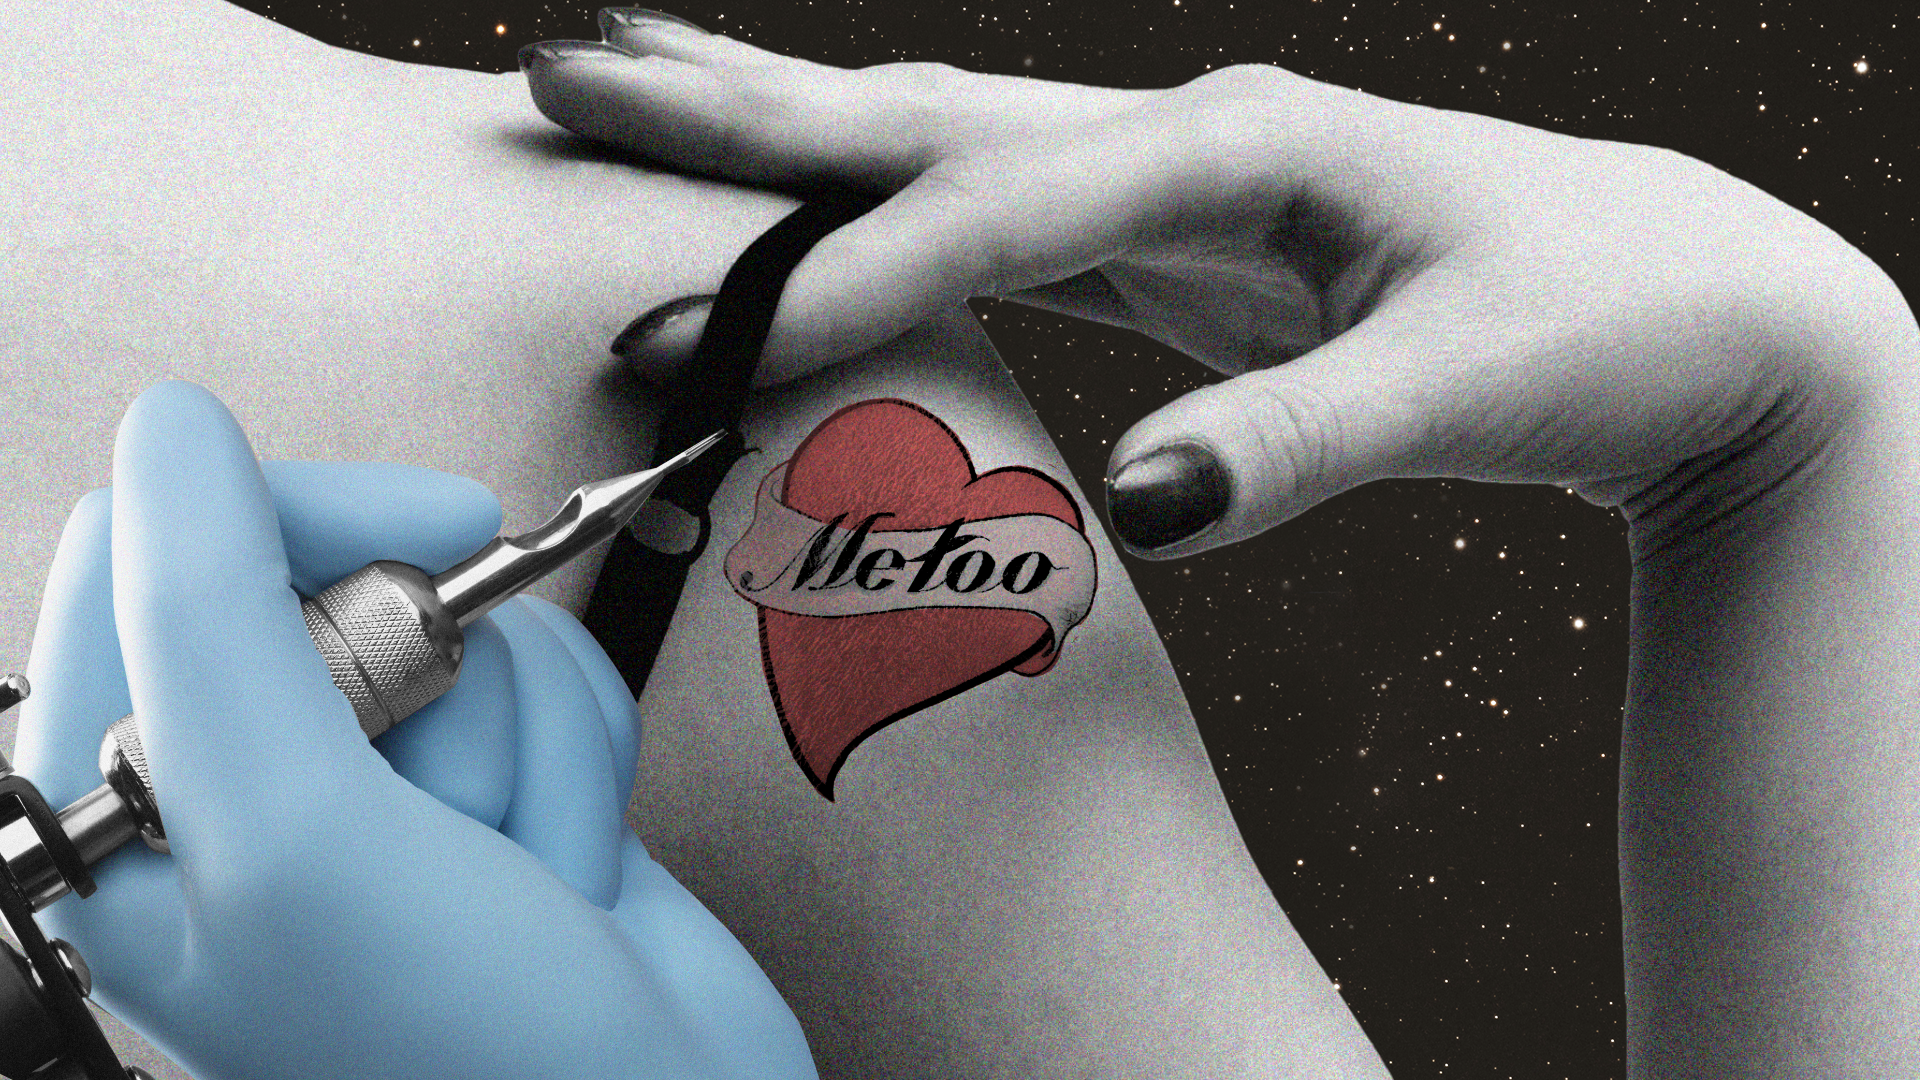 Sexual assault in the tattoo world has been silenced for too long